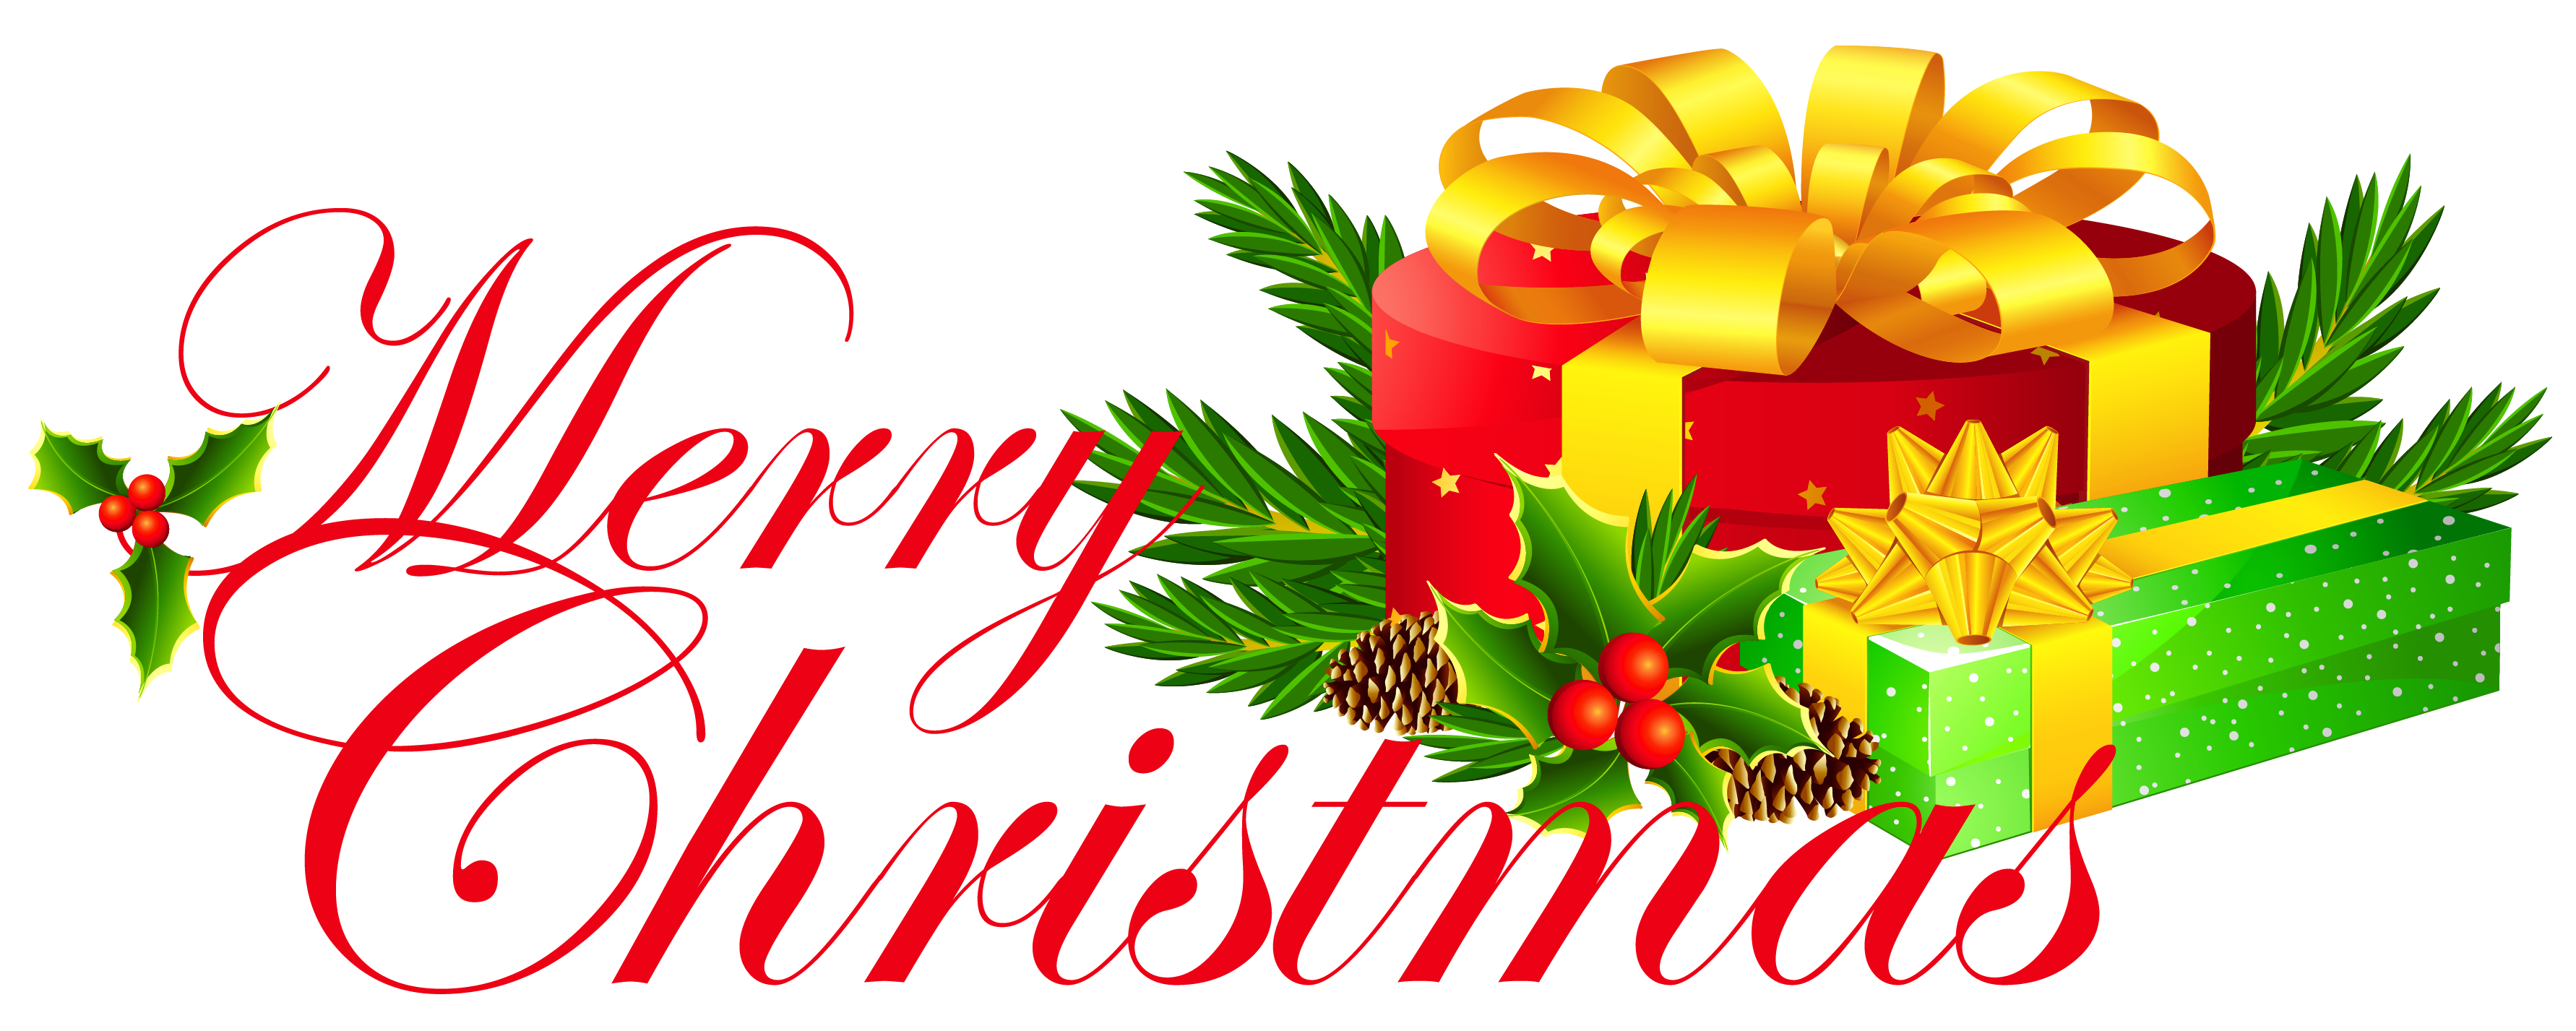 merry christmas clip art - Merry Christmas Clipart Images